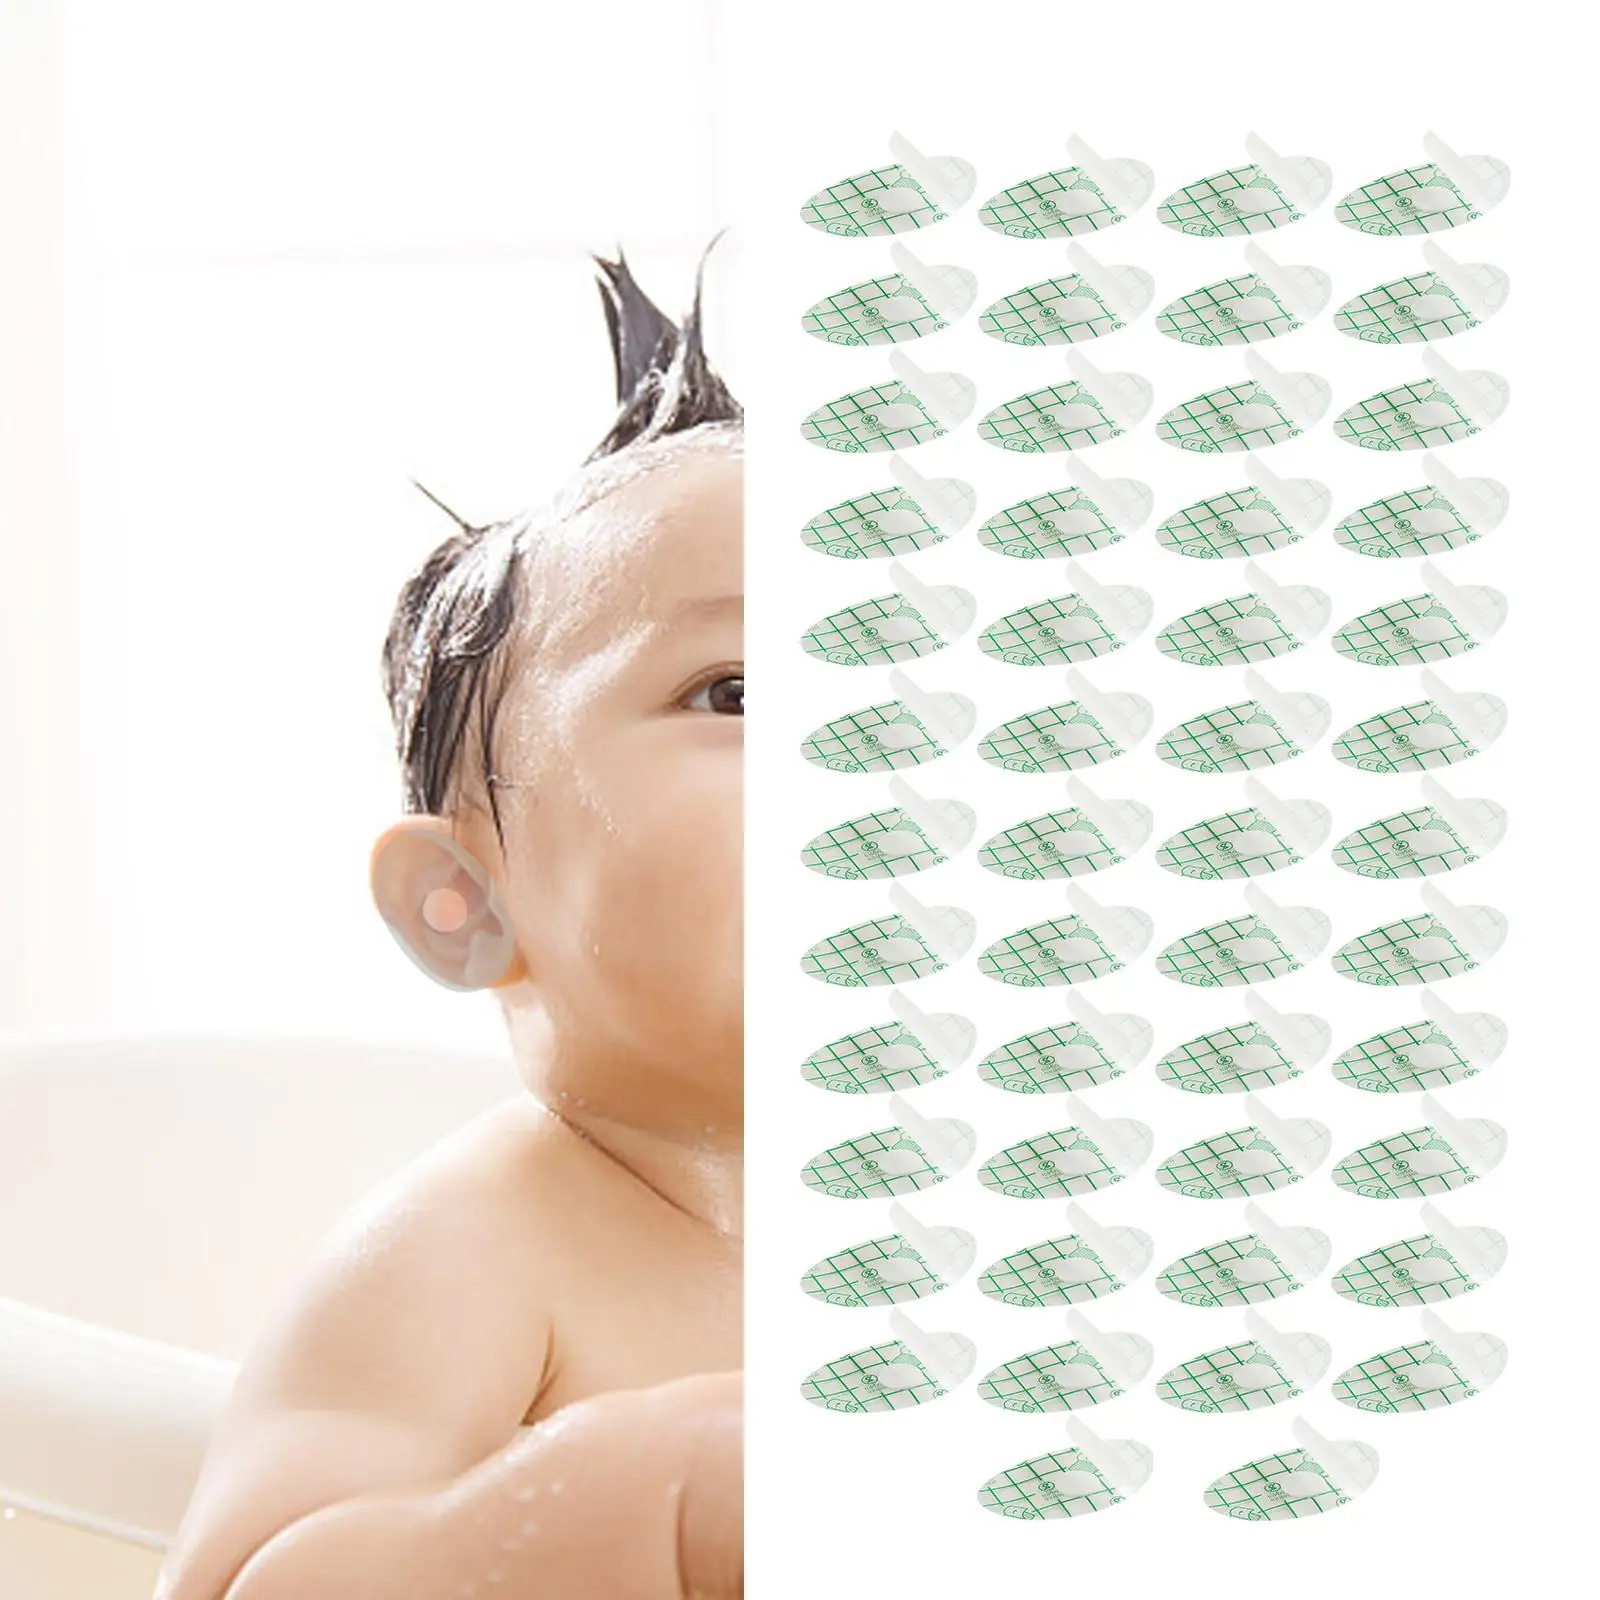 50Pcs Breathable Waterproof Baby Ear Stickers Earmuffs Ears Protector Covers for Swimming Hairdressing Infants Toddlers